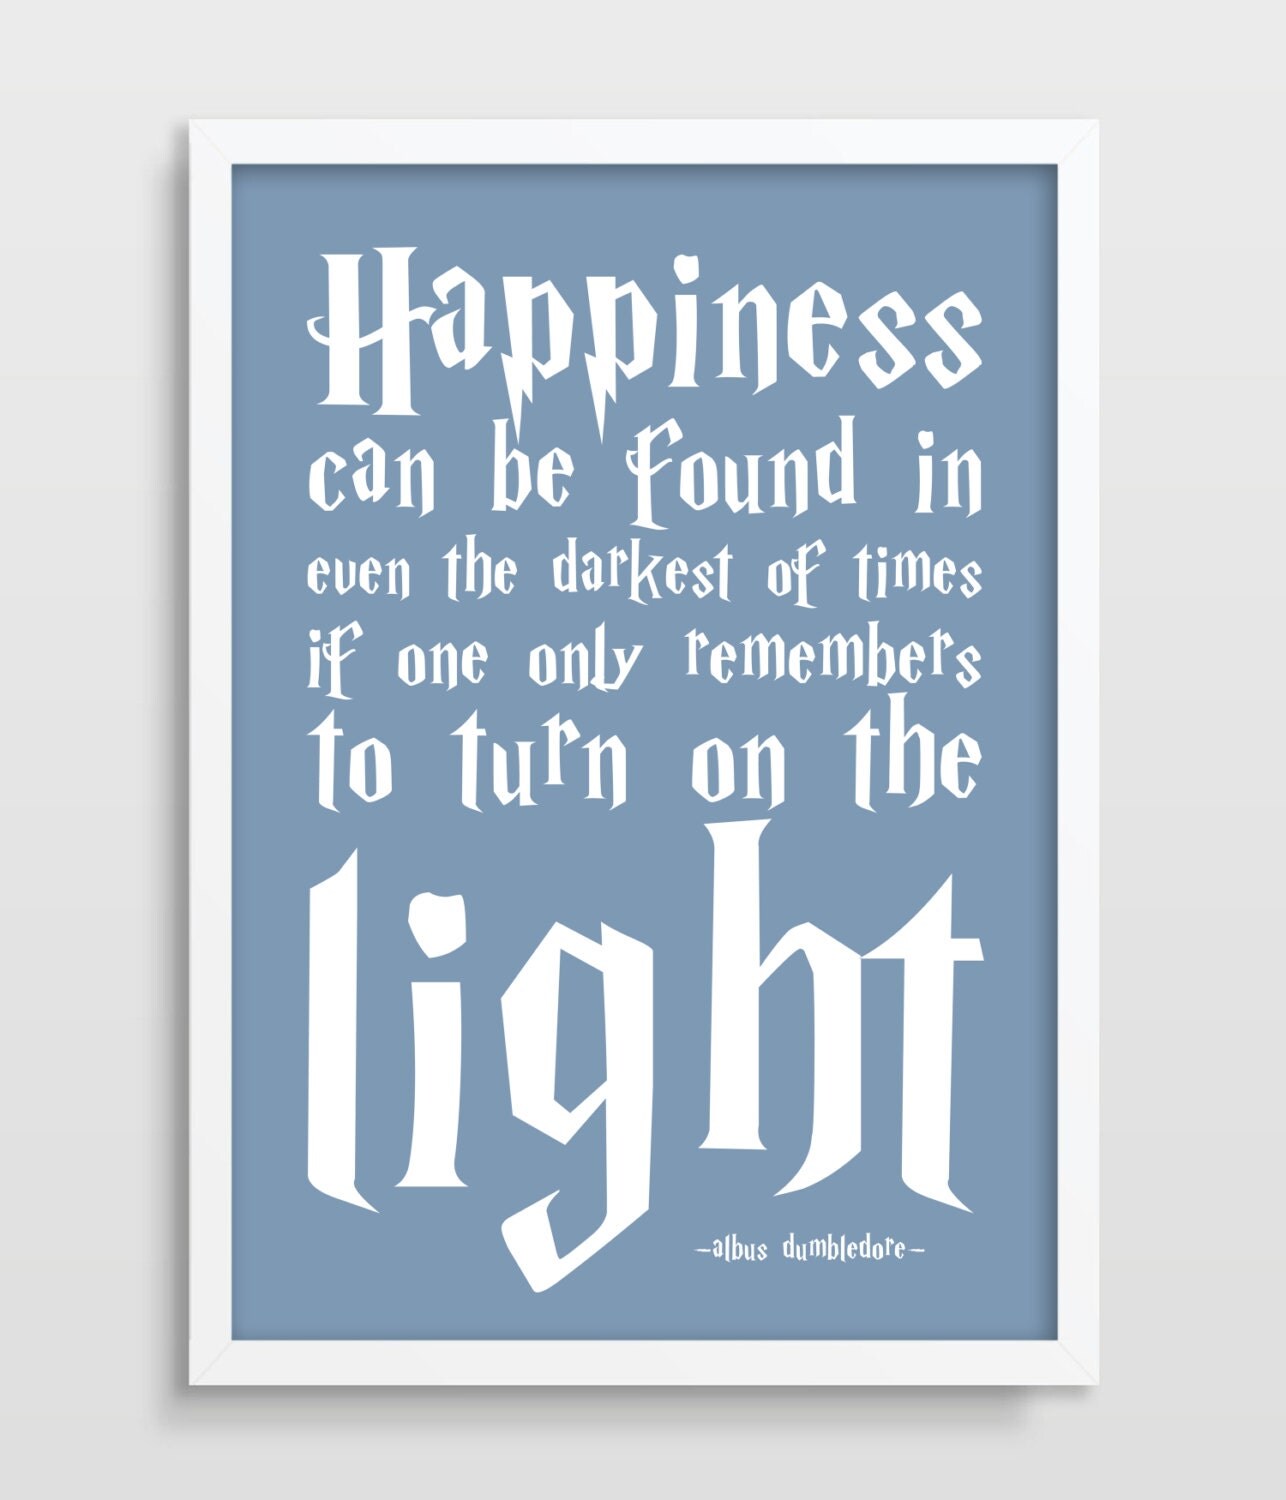 harry potter poster albus dumbledore quote happiness can